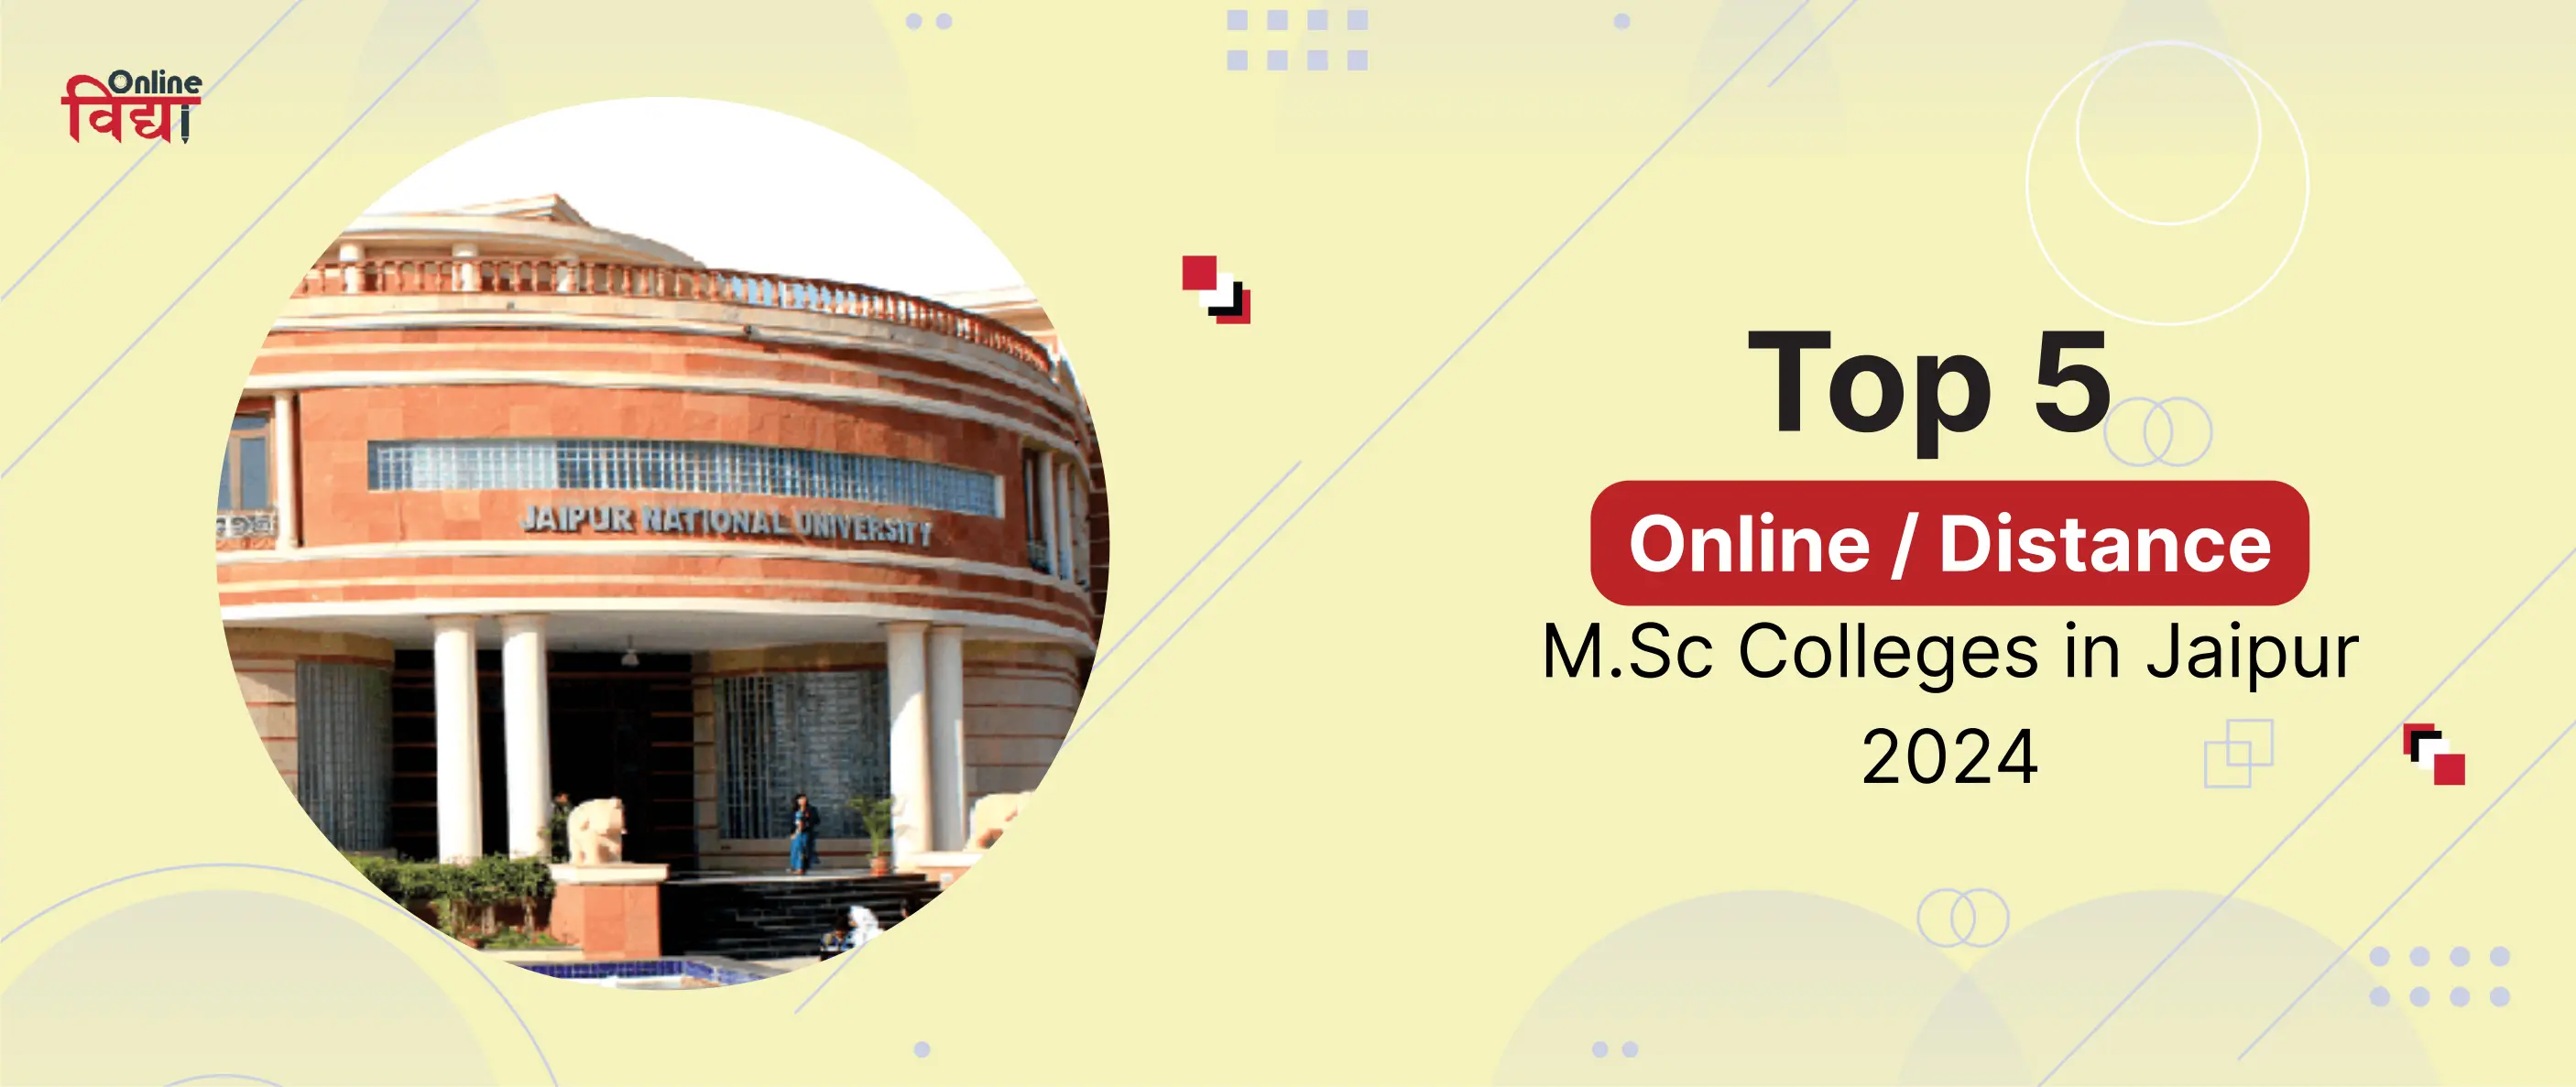 Top 5 Online/Distance M.Sc Colleges in Jaipur 2024